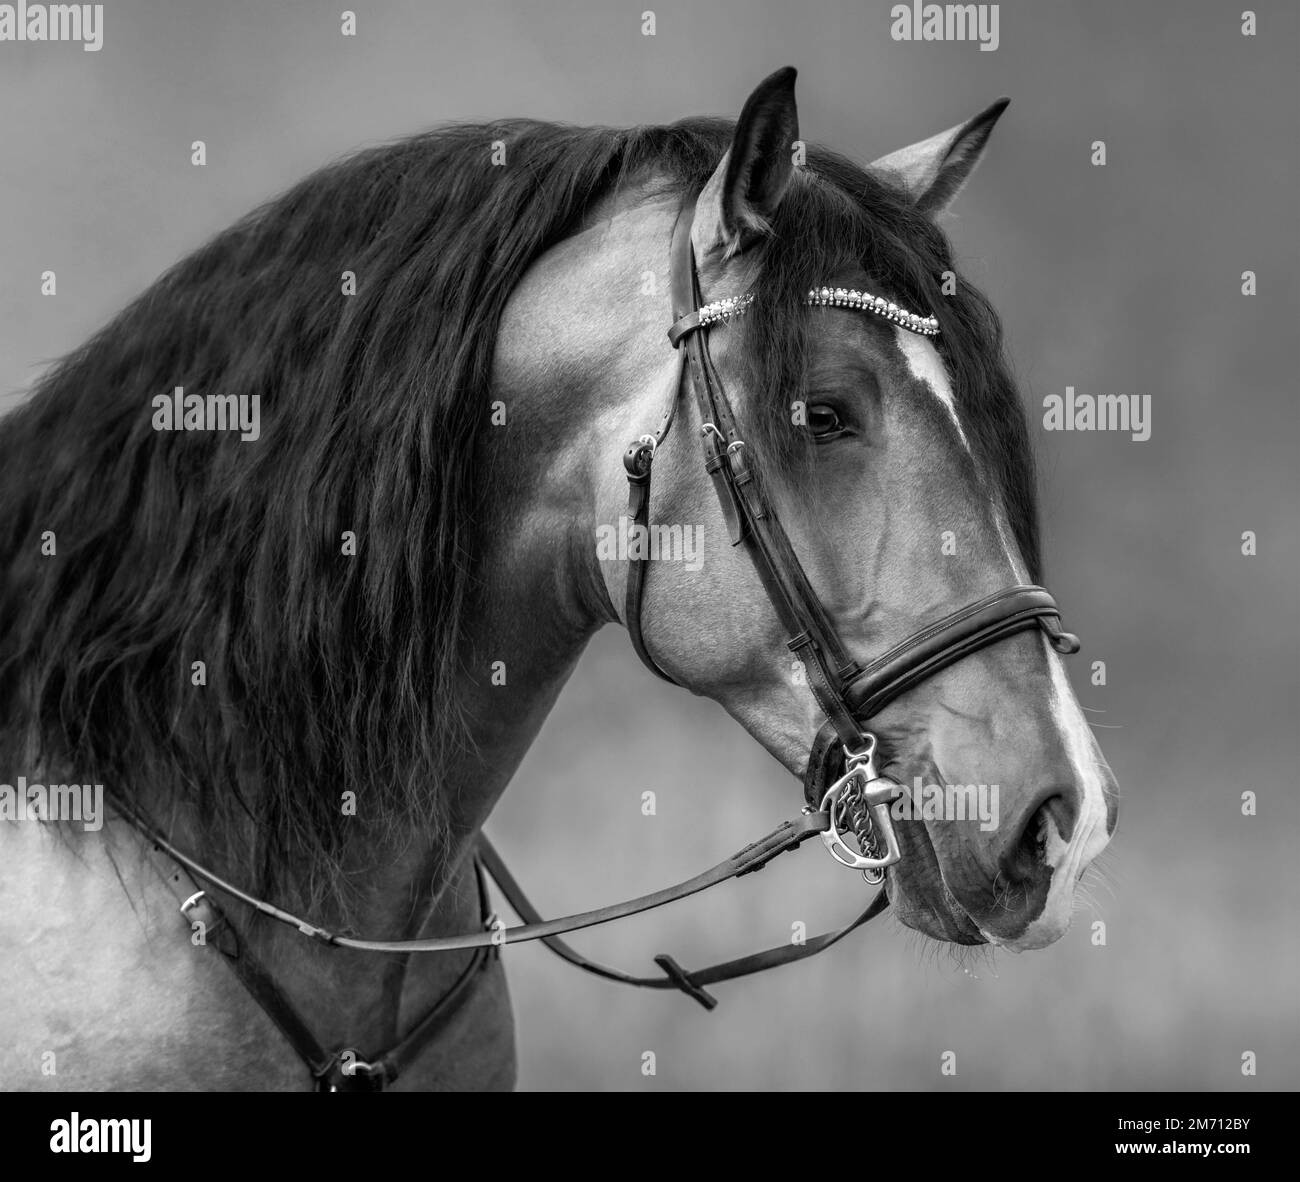 Spanish horse with long mane and forelock in bridle. Black and white portrait. Stock Photo